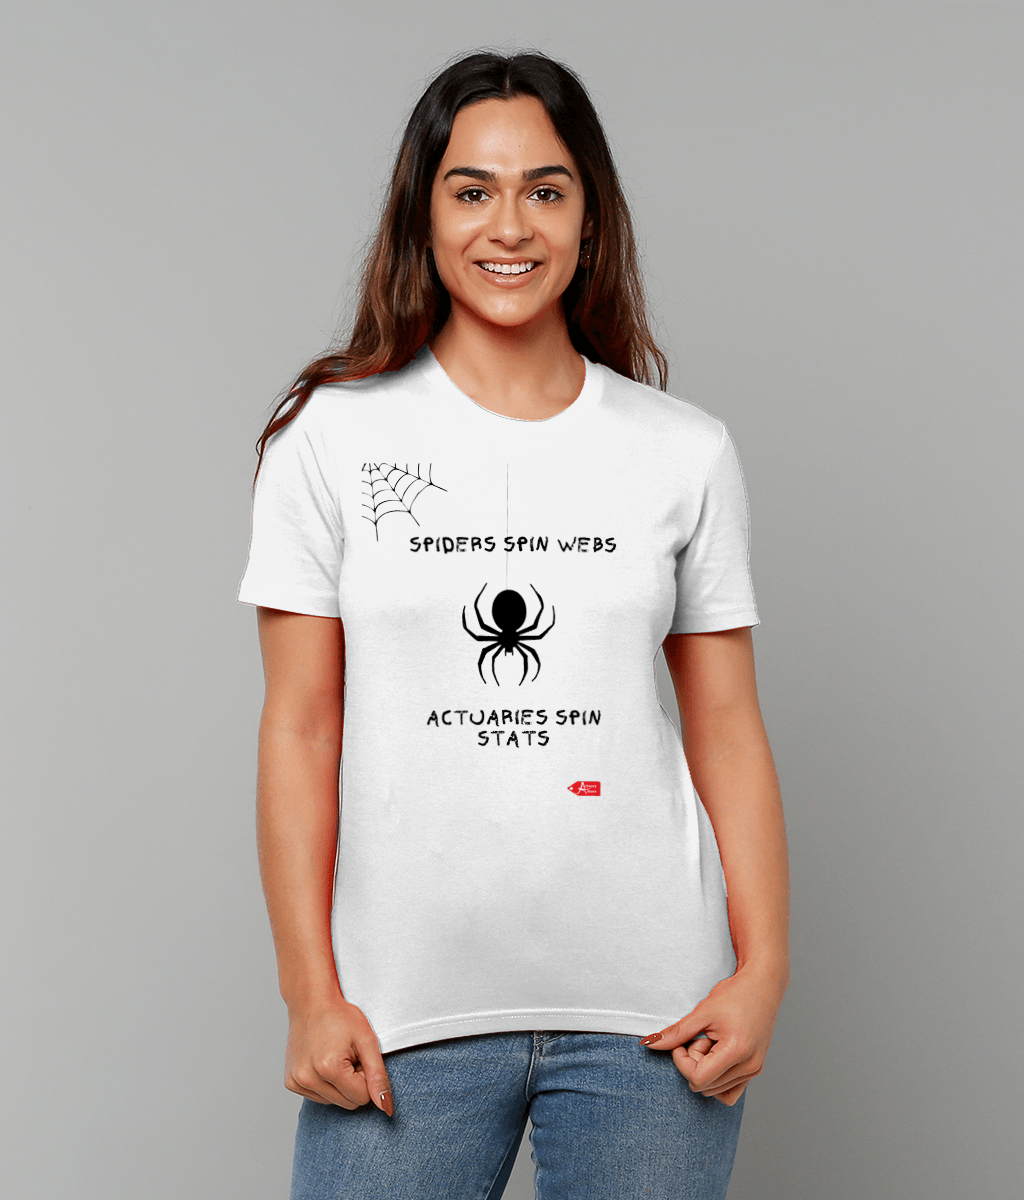 Spiders Spin Webs Actuaries Spin Stats White T-shirt